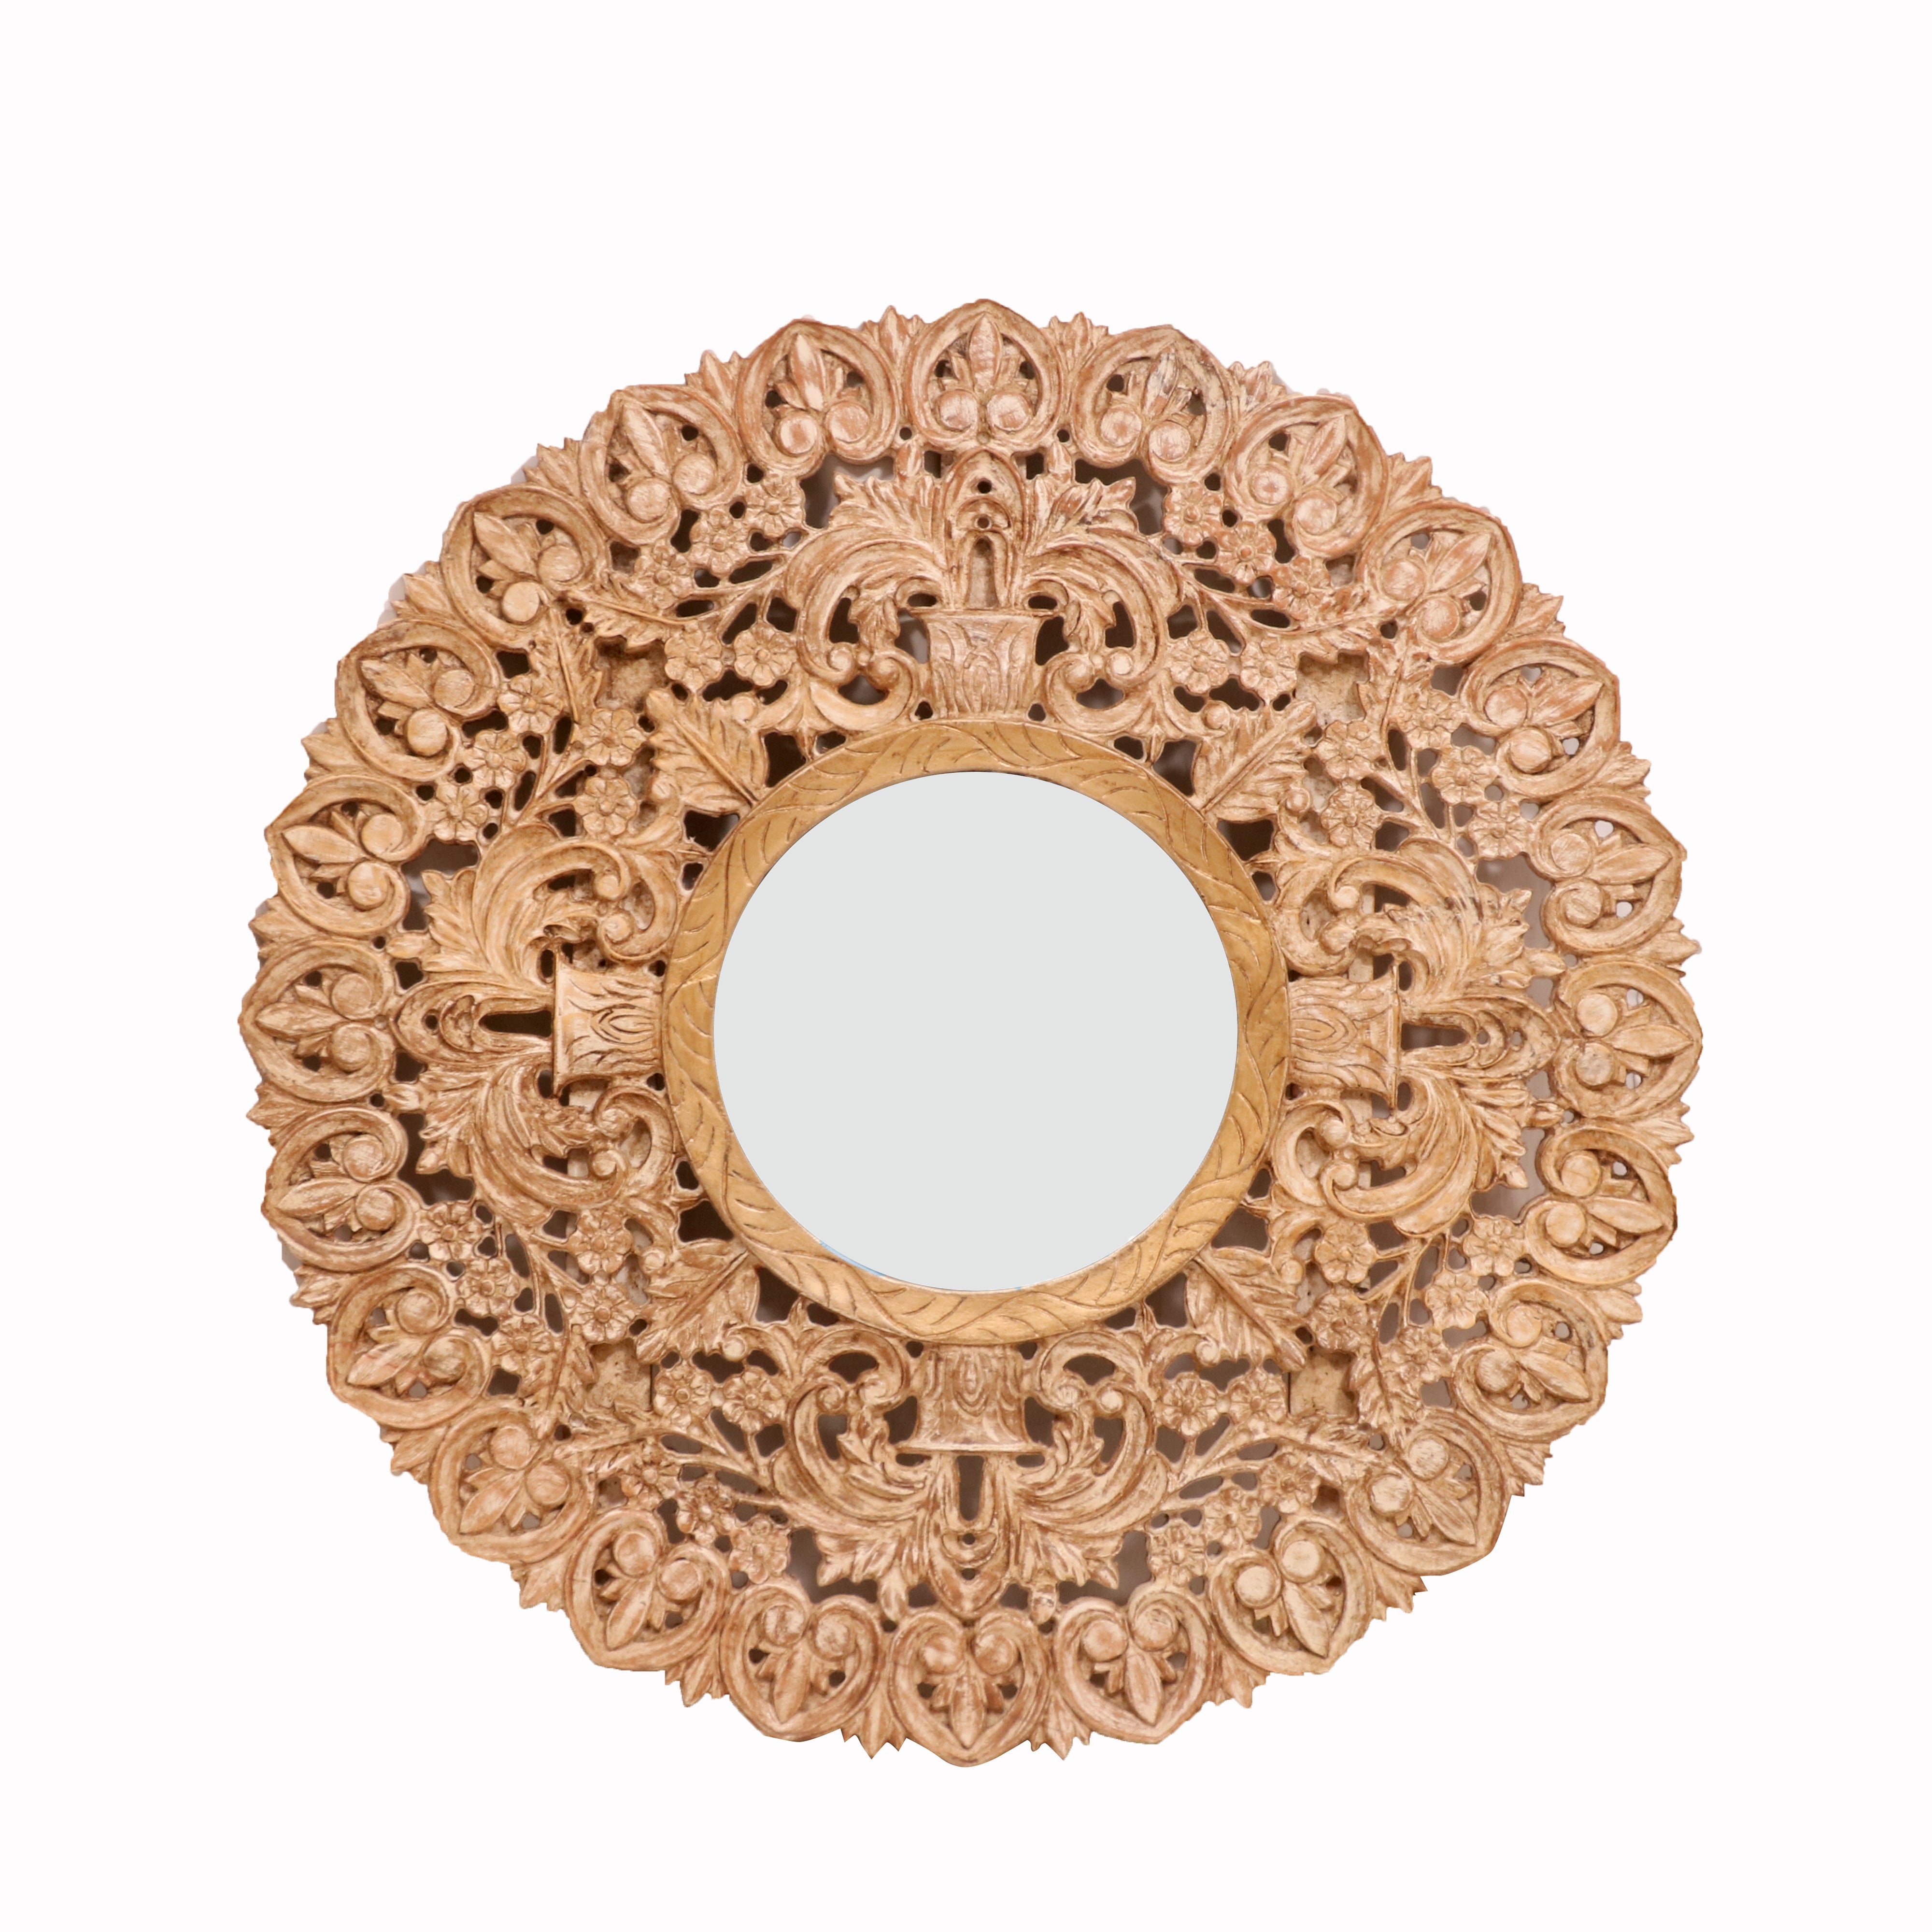 Intricate Carved Wooden Mirror Mirror